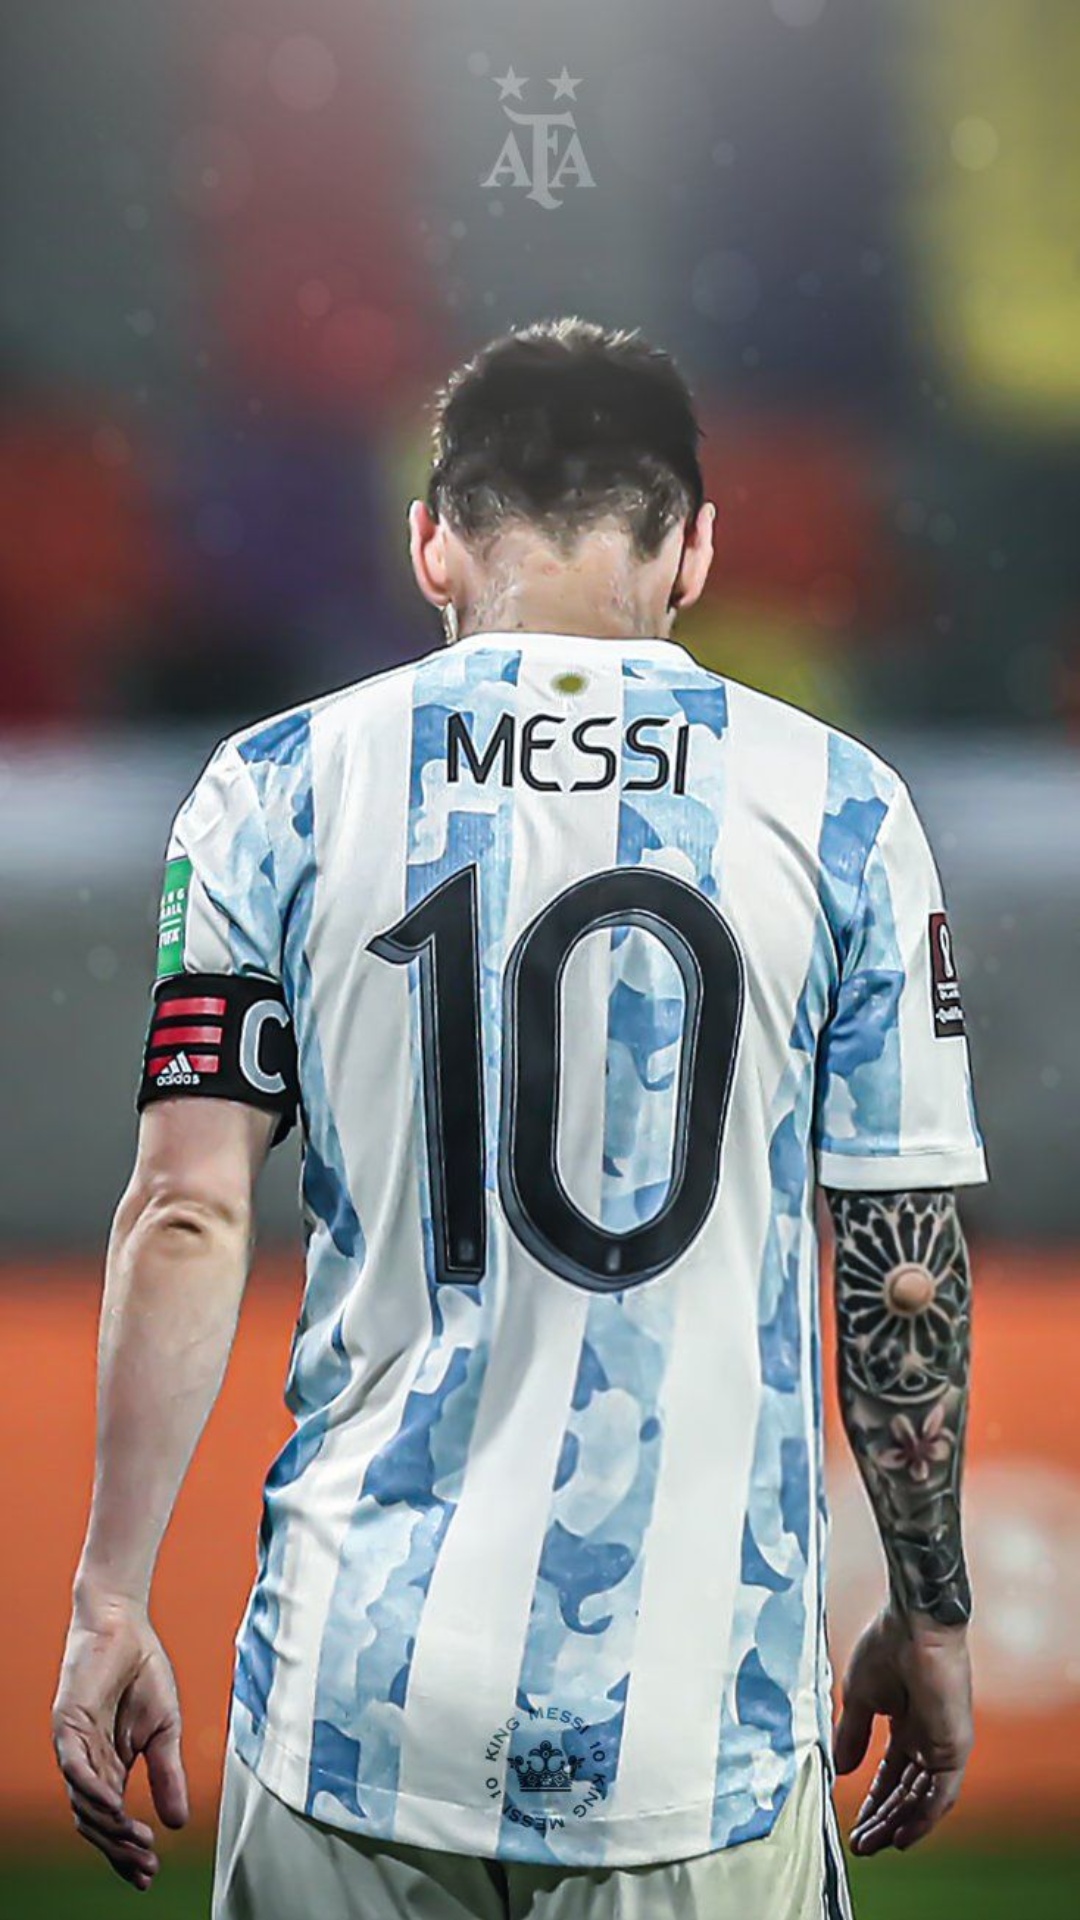 Messi Fifa World Cup Wallpapers  Top 15 Best Messi Fifa World Cup  Wallpapers Download